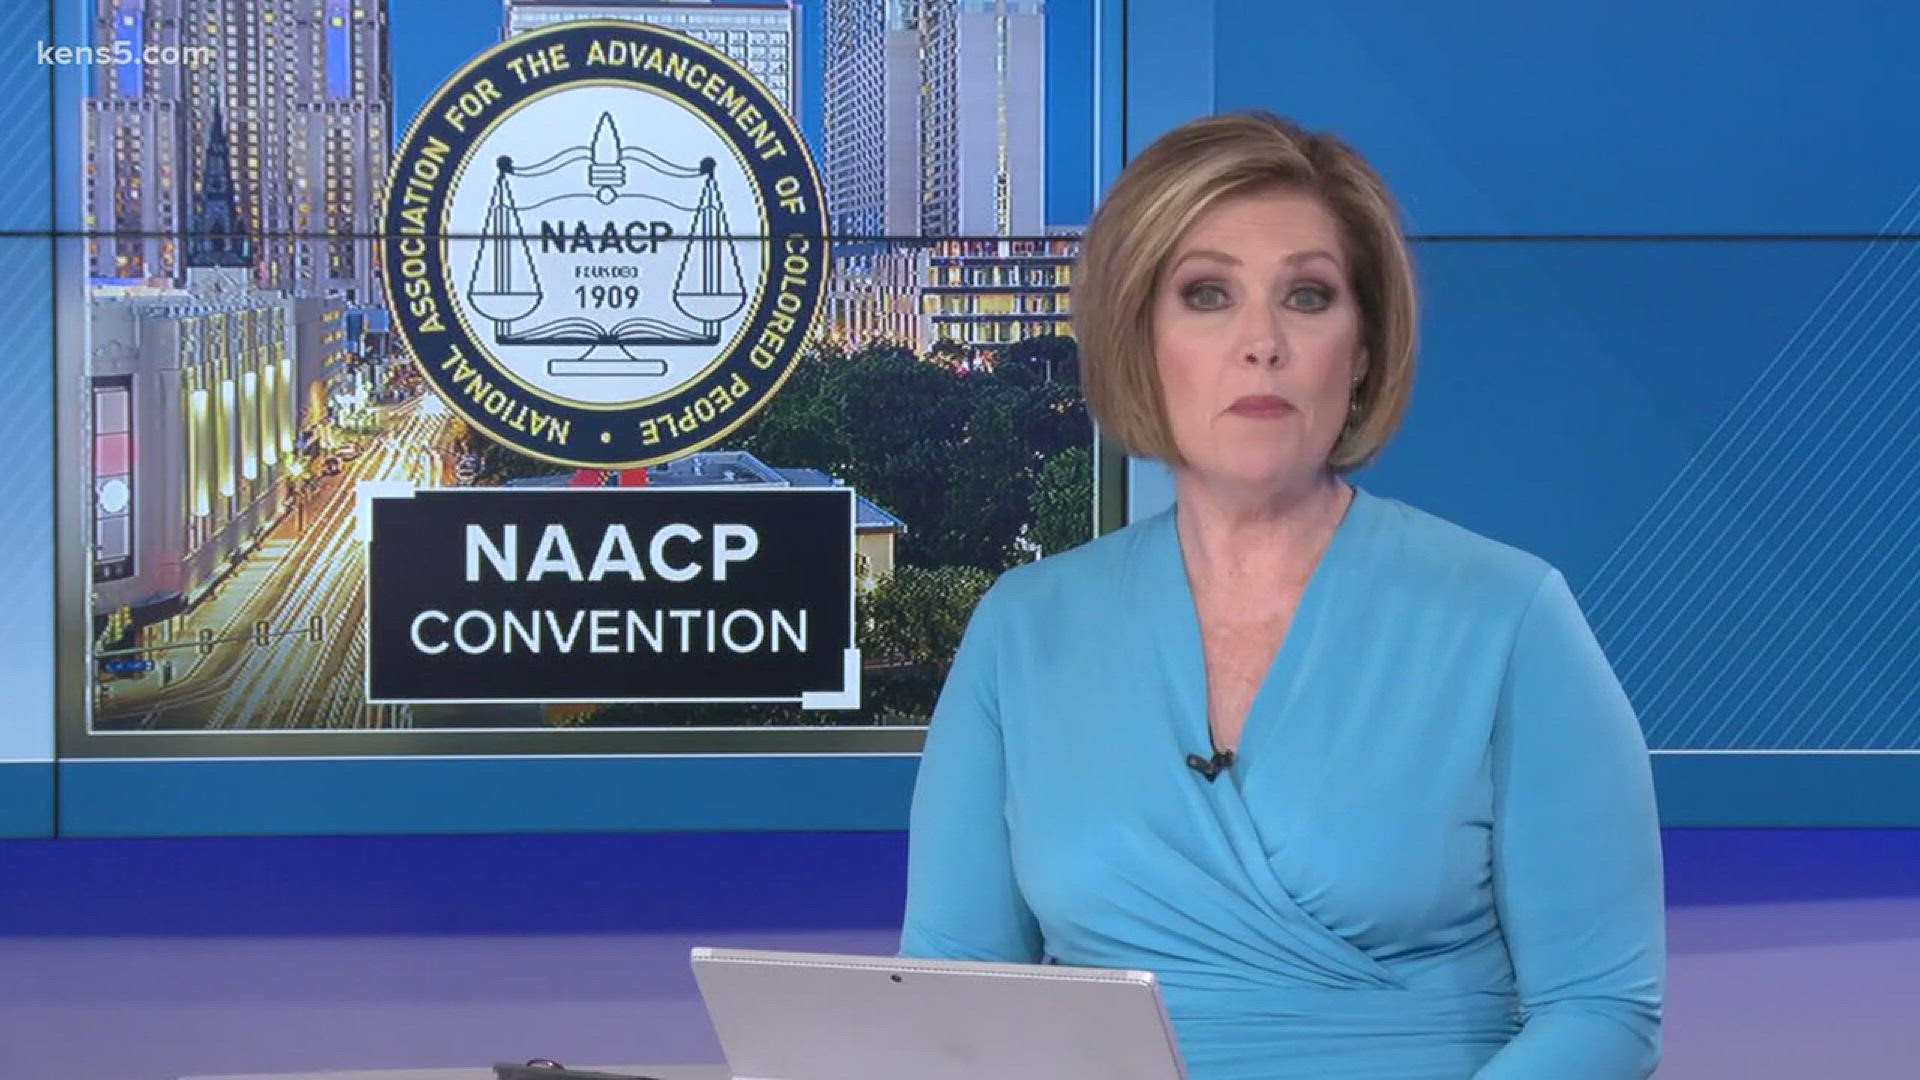 Thousands of NAACP members from around the world are at the Henry B. Gonzales Convention Center working on a plan to empower people of color across the country. Eyewitness News reporter Aaron Wright is downtown with the latest.